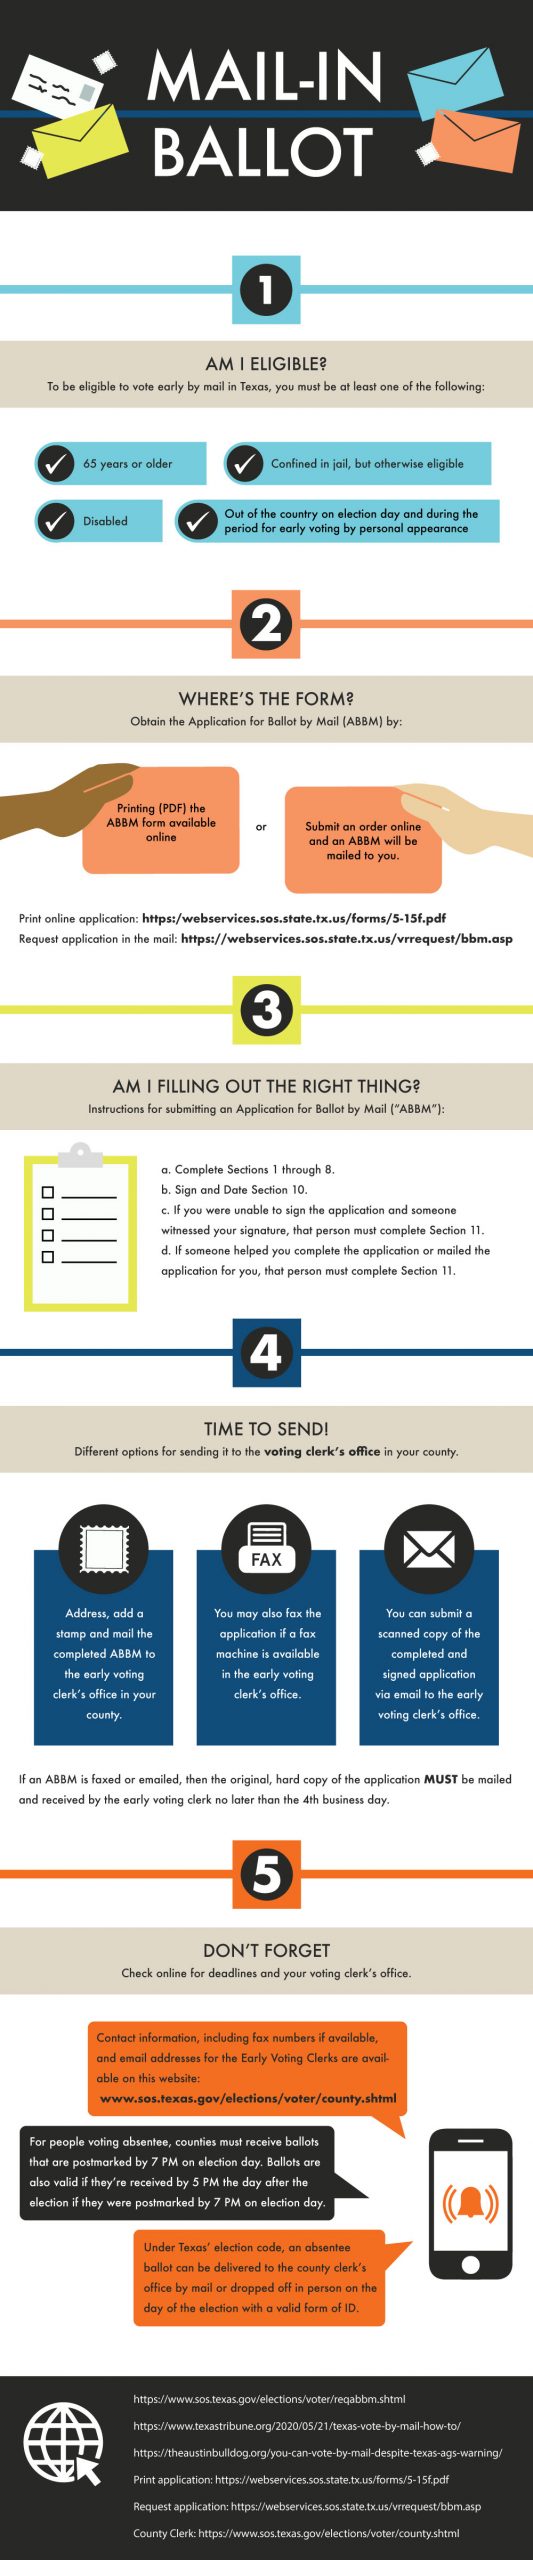 INFOGRAPHIC: Infographic depicting information on the mail-in voting option. Infographic by The Signal reporter, Estefany Sanchez.